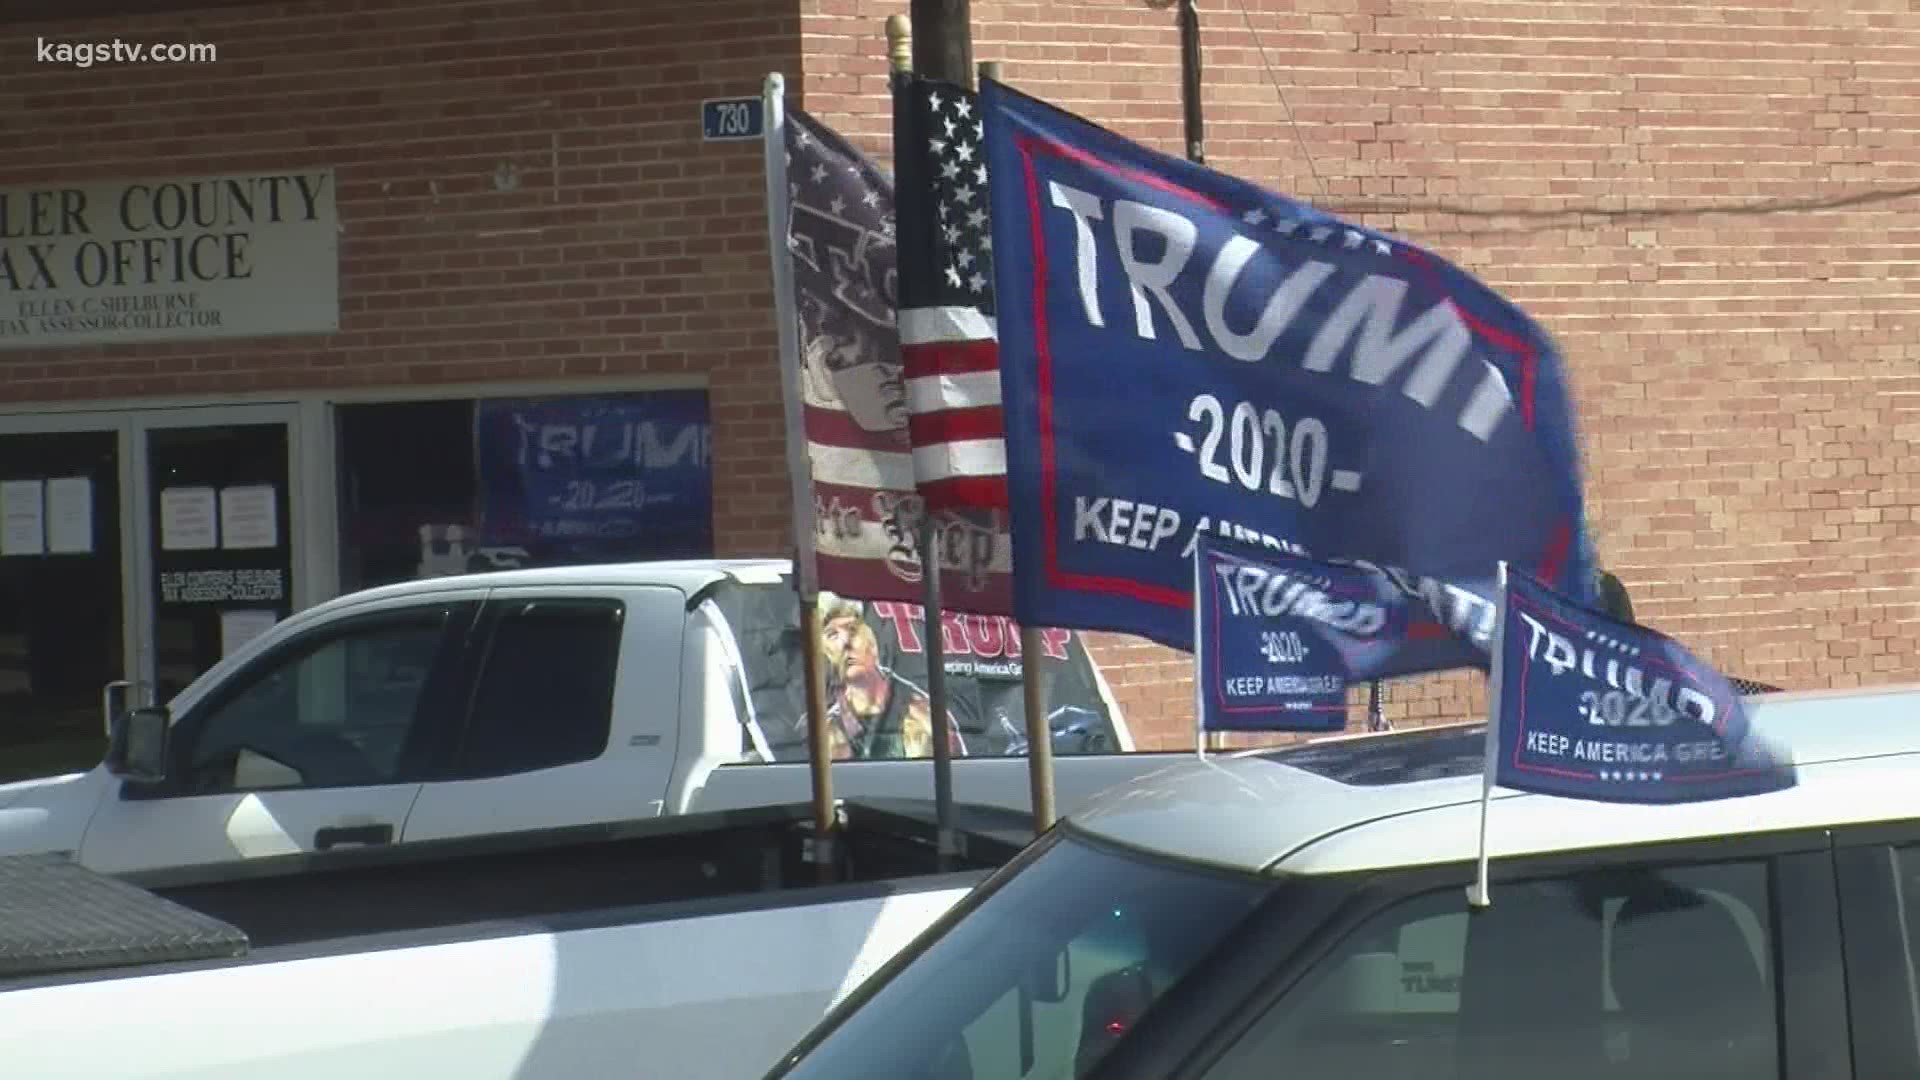 With Election Day around the corner, be prepared to see a lot of rallies popping up around the nation.